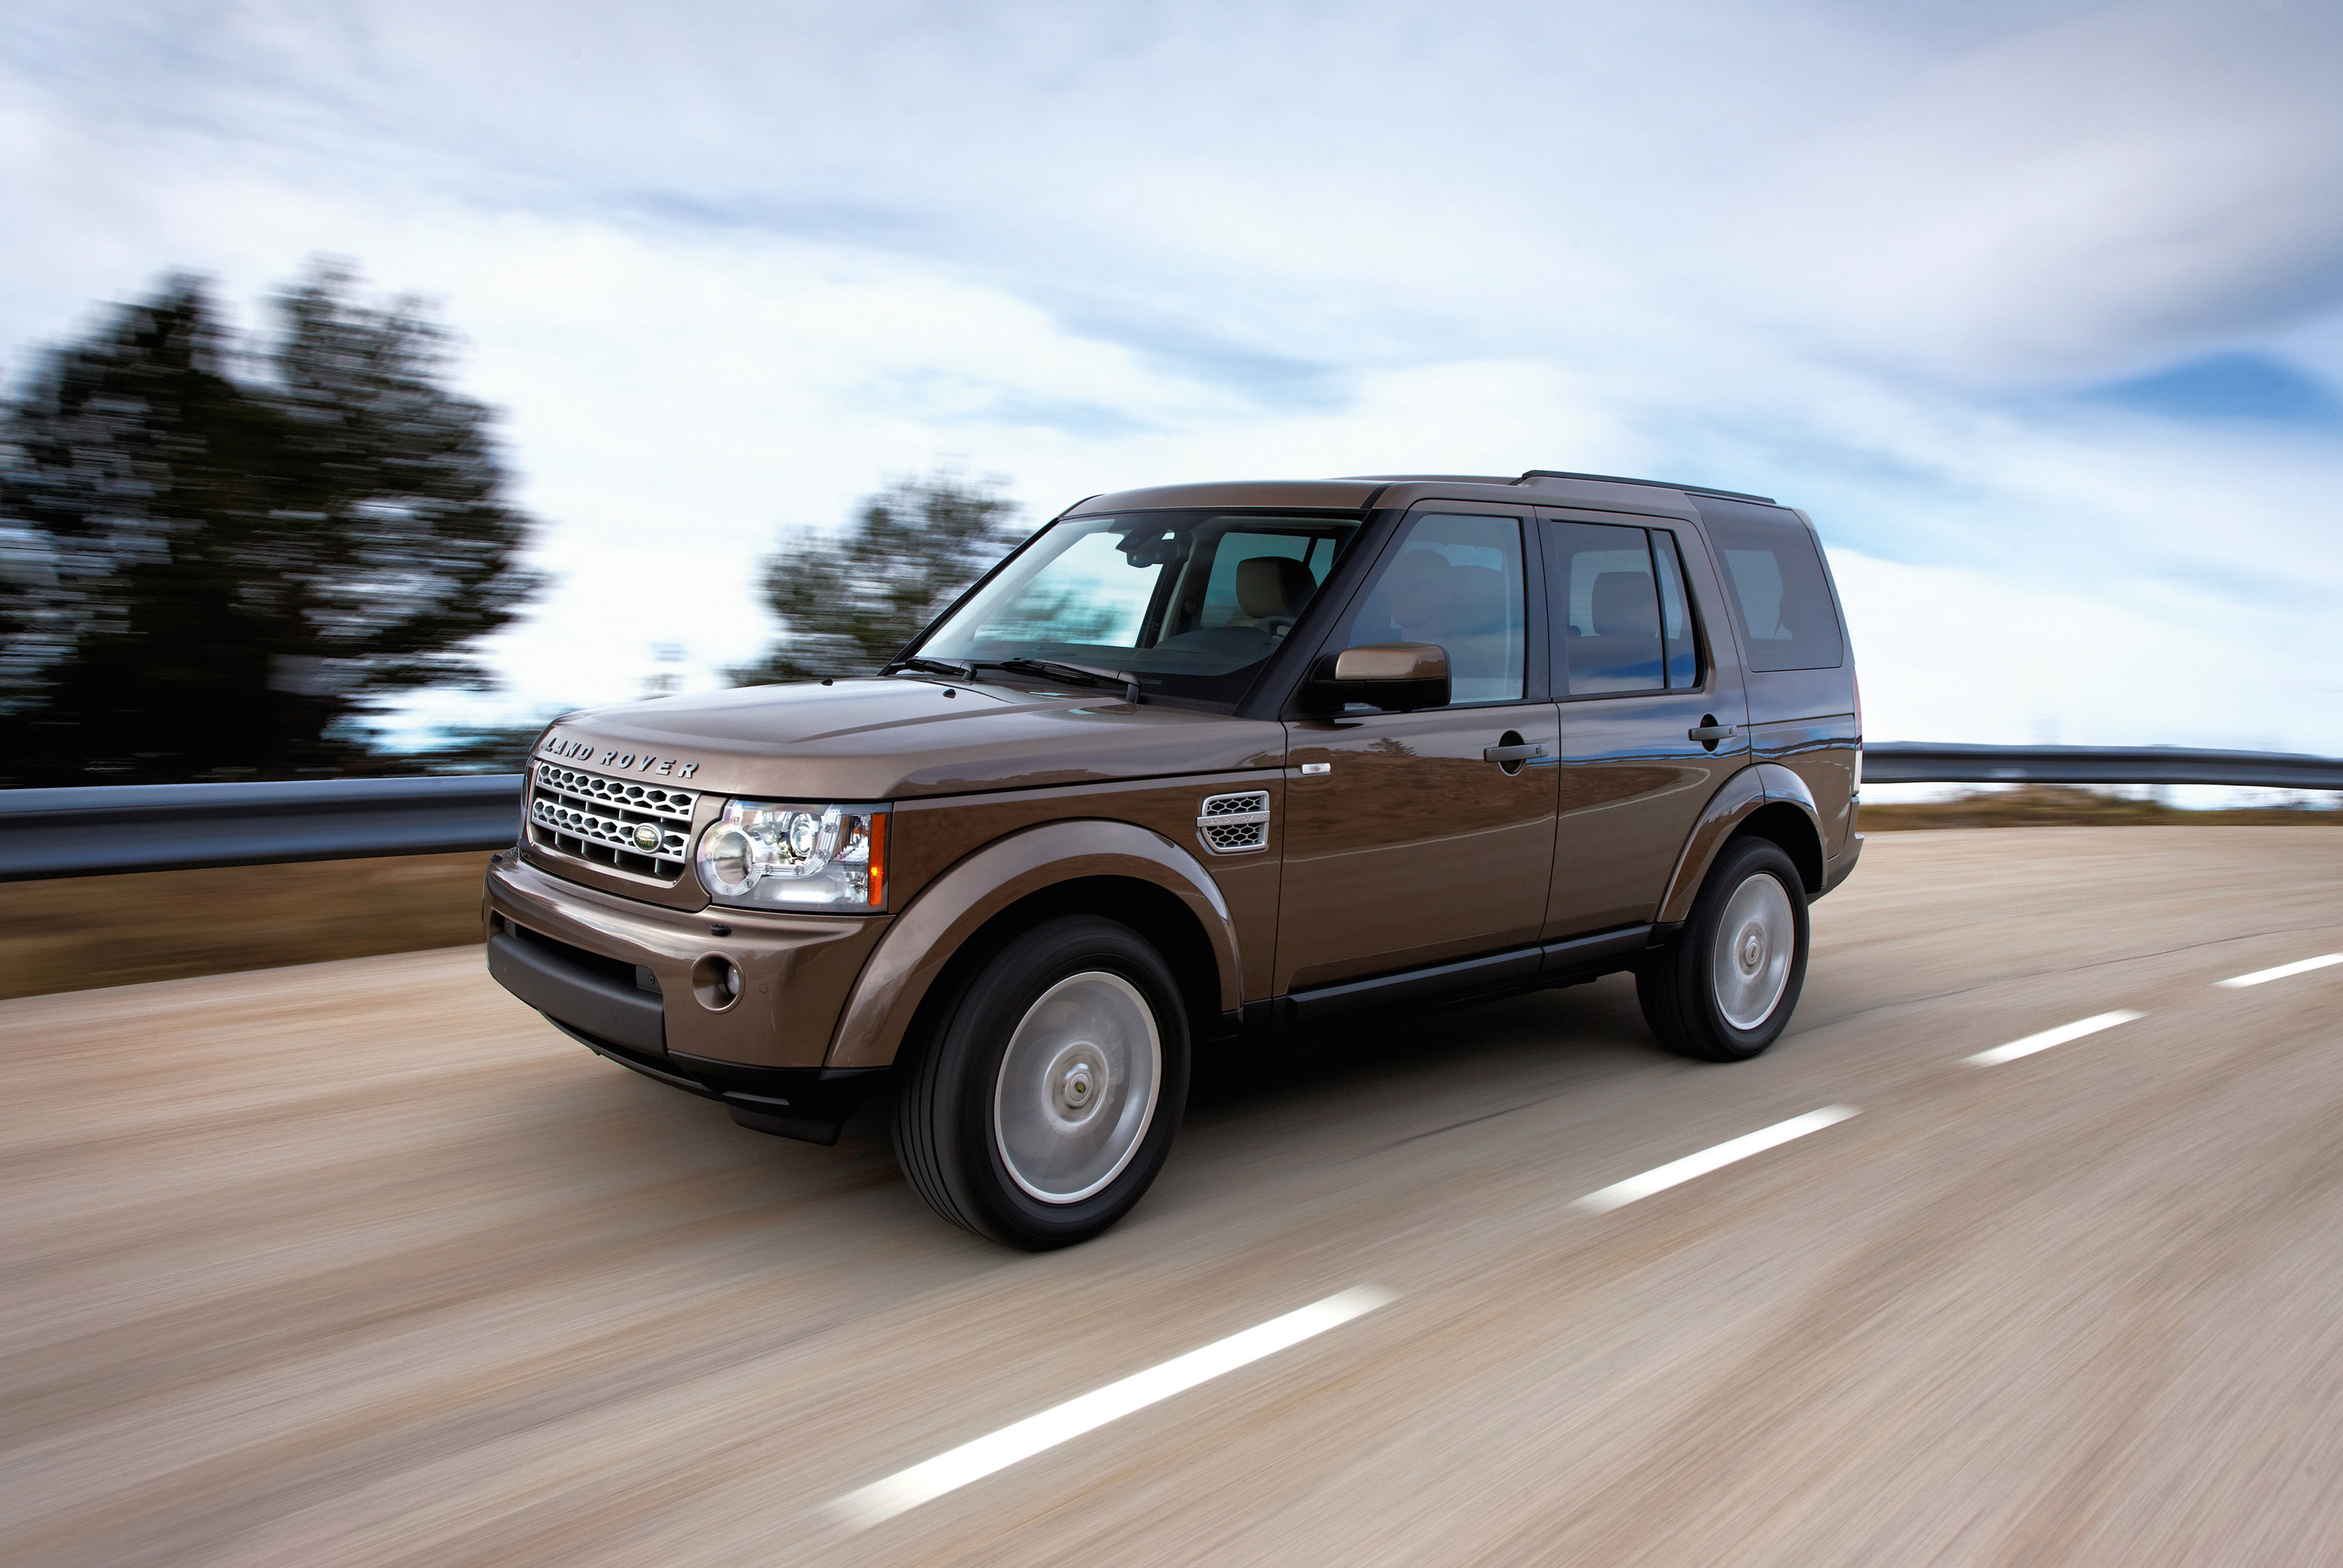 2010 Land Rover Discovery 4 HD Pictures